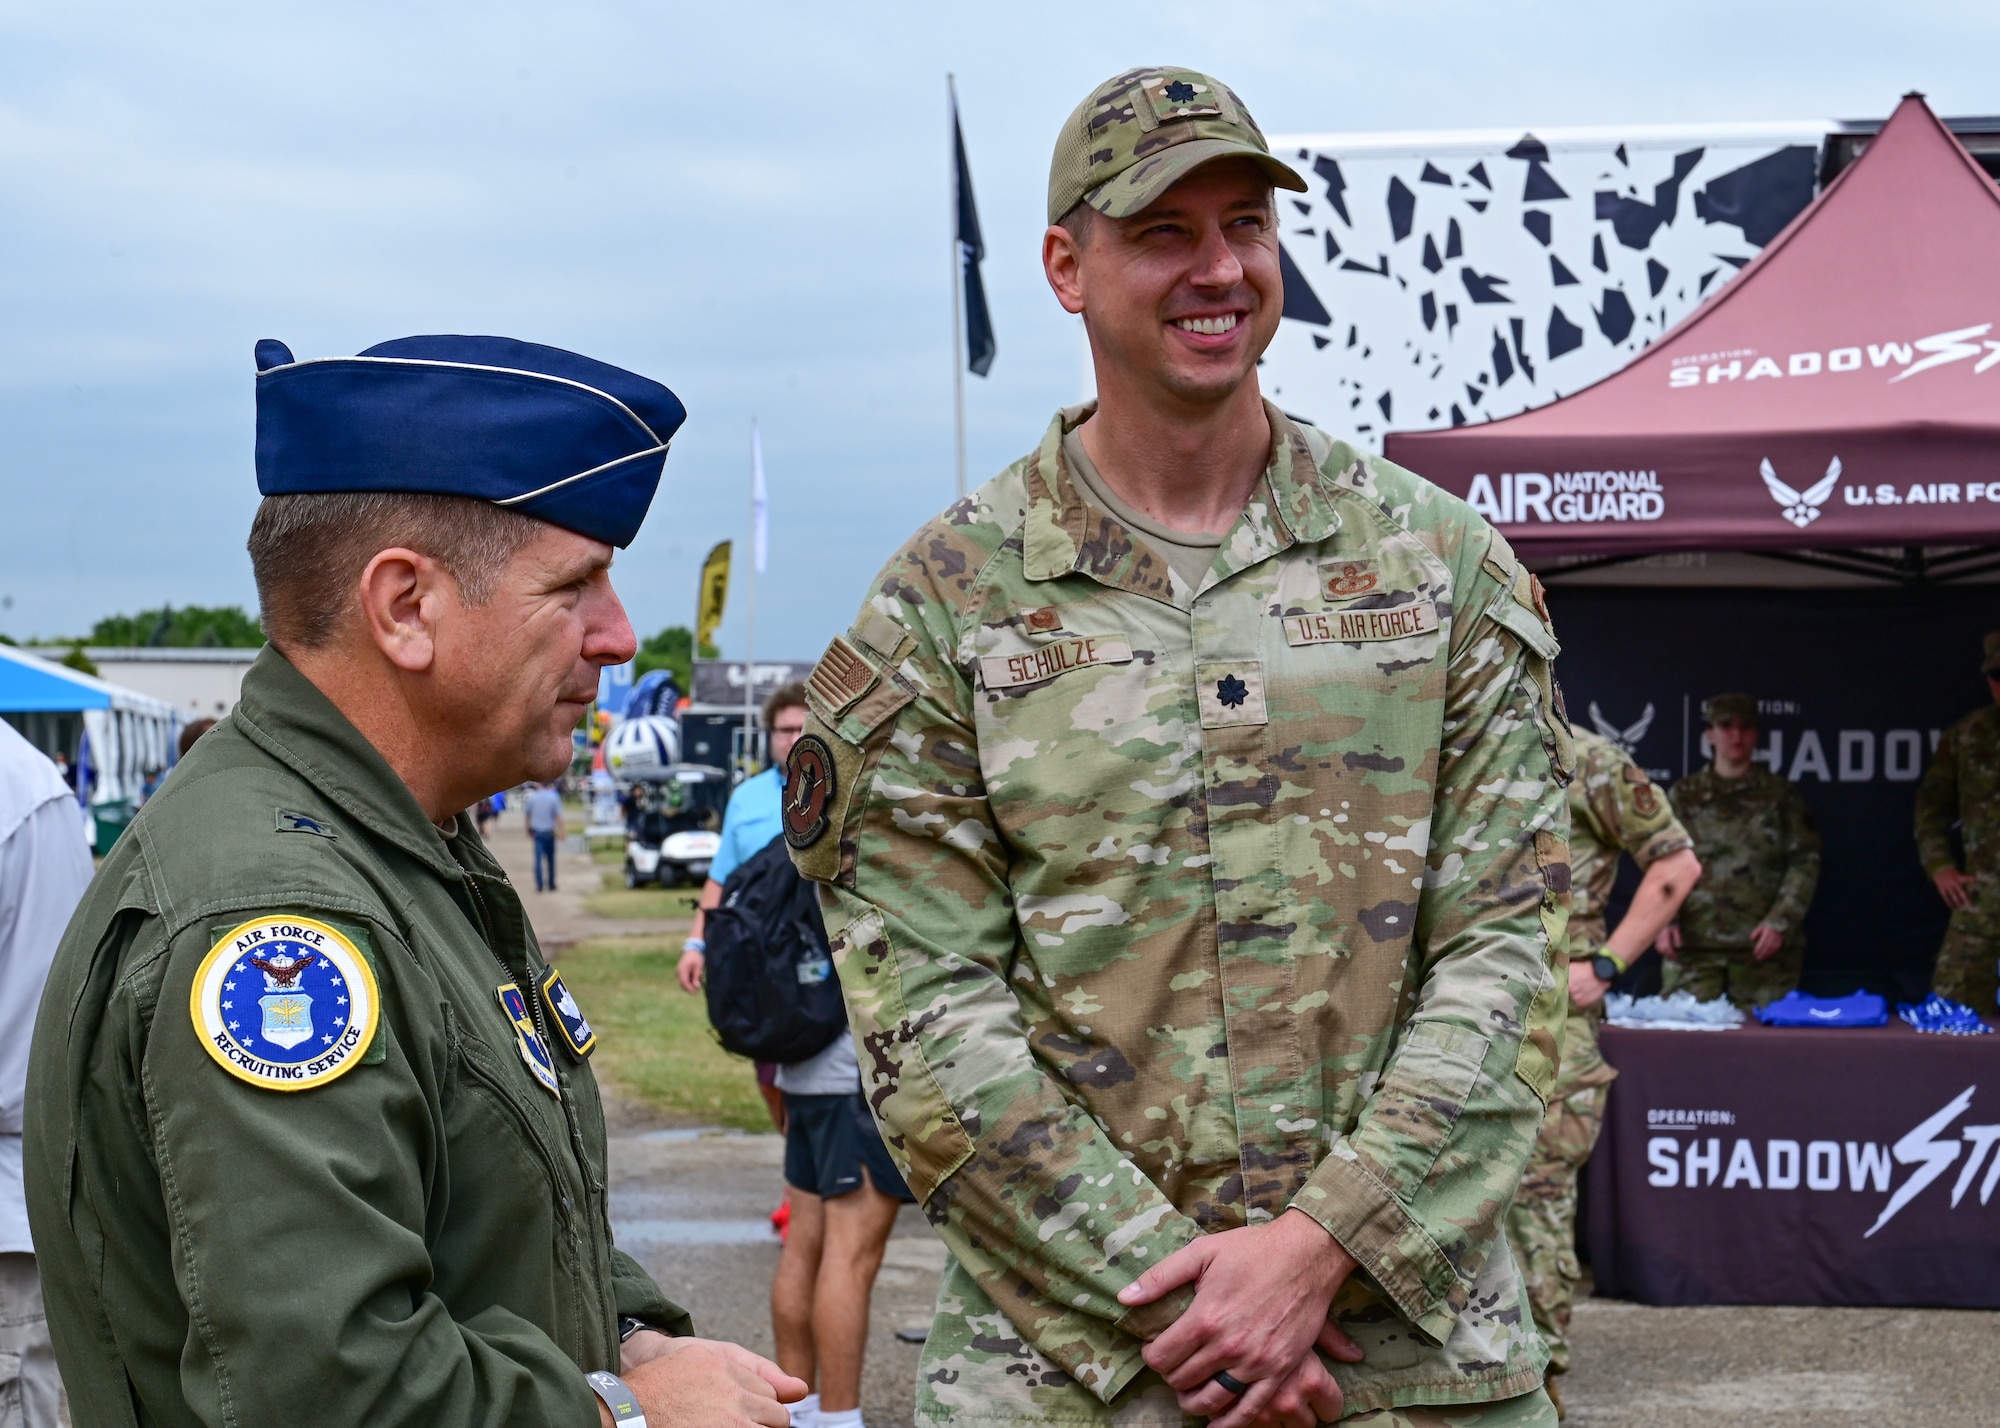 Brig. Gen. Christopher Amrhein, Air Force Recruiting Service commander, speaks with Lt. Col. Benjamin Schulze, 347th Recruiting Squadron commander, during EAA AirVenture Oshkosh, in Oshkosh, WI, July 26, 2023.